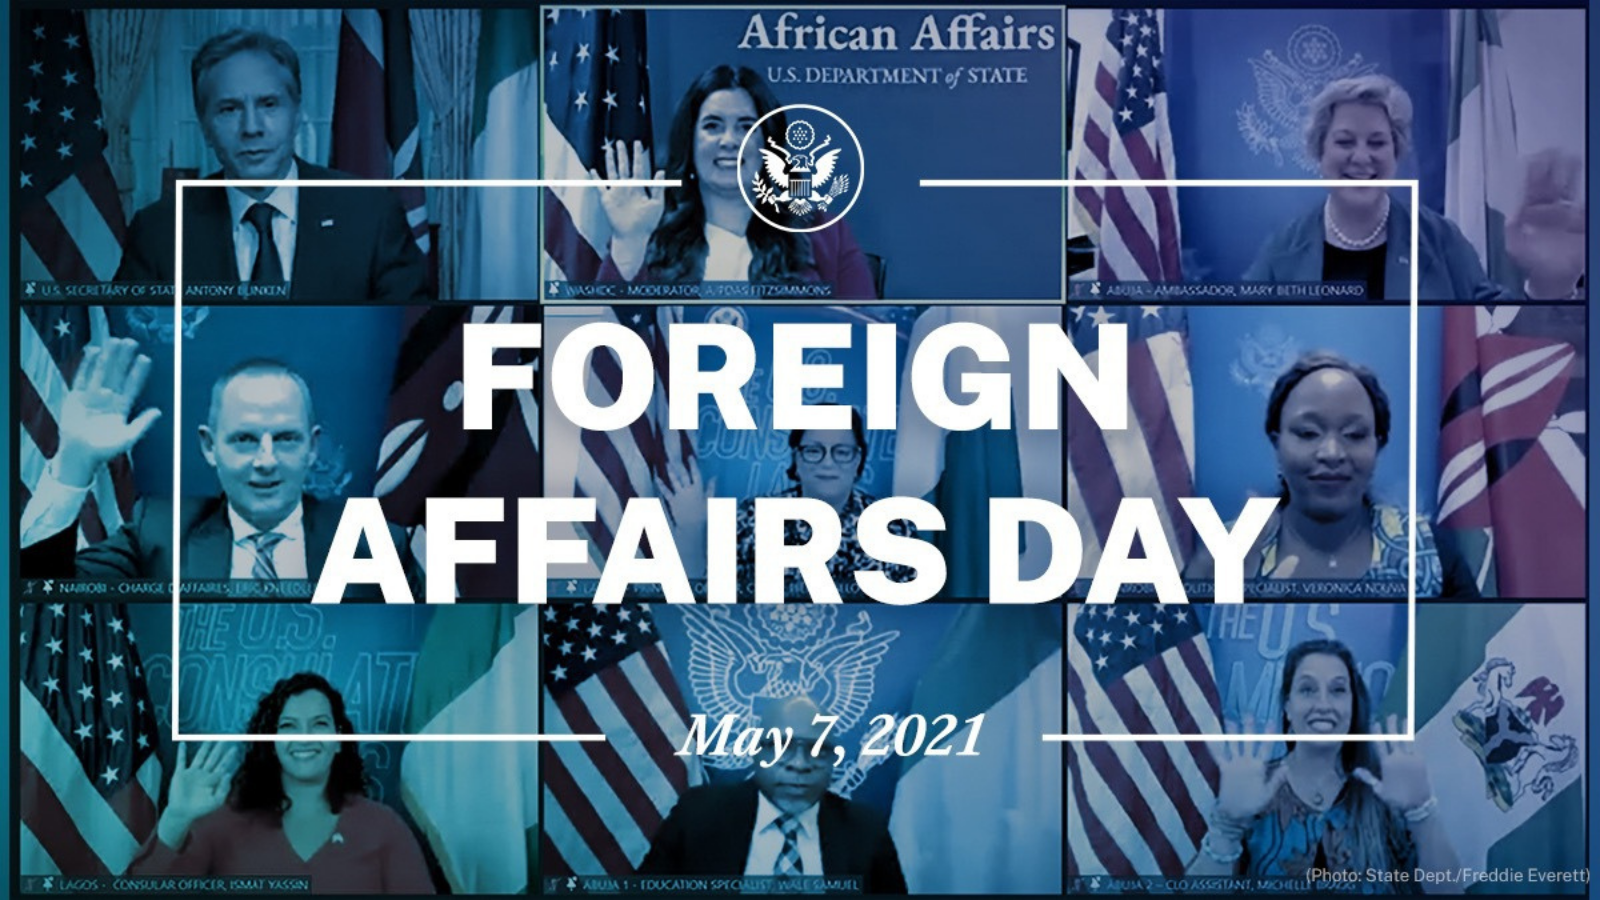 Foreign Affairs Day: May 7, 2021